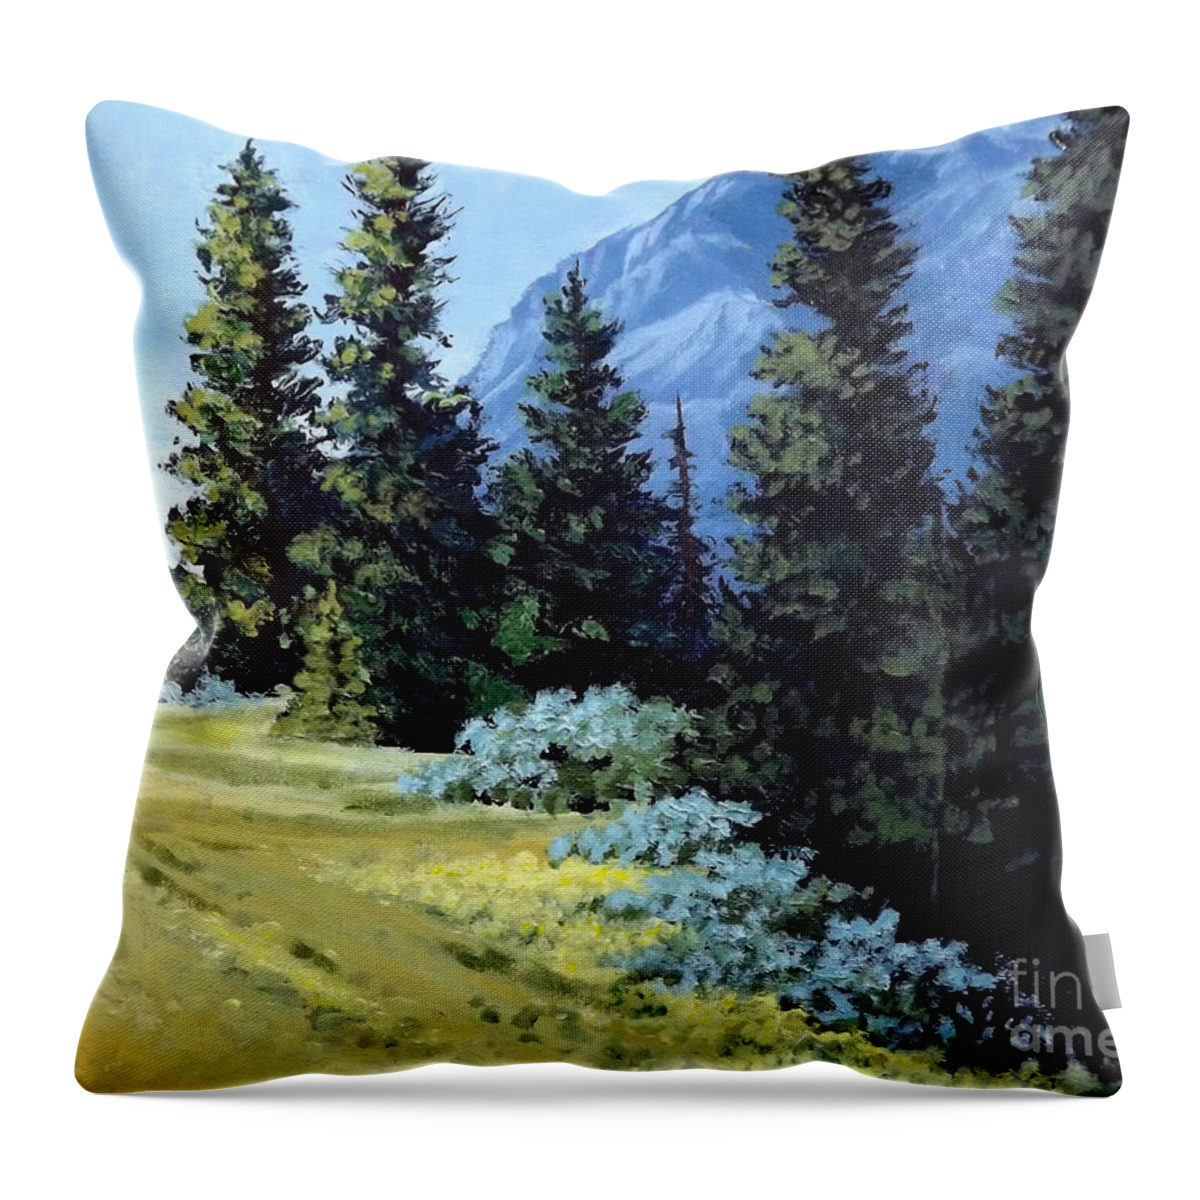 Blue Throw Pillow featuring the painting Rocky Mountain Meadow by Diane Ellingham